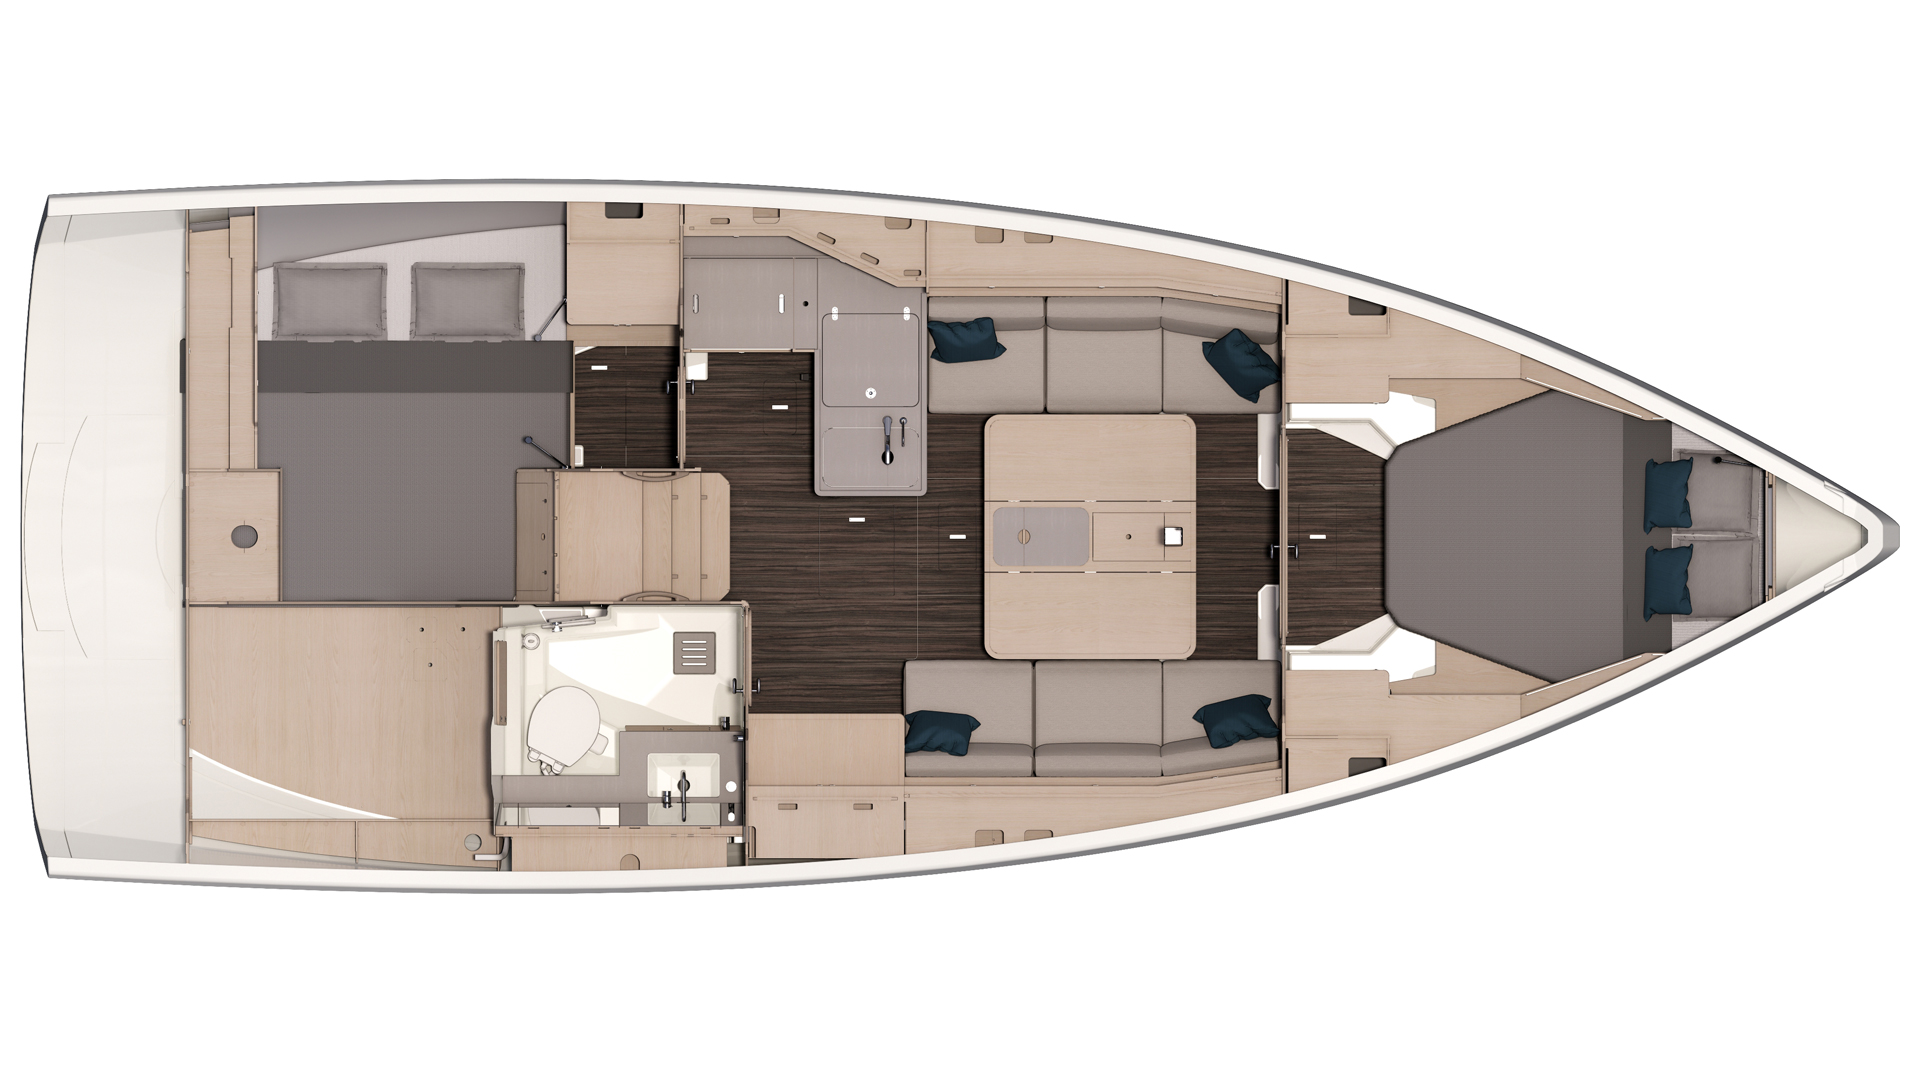 DUFOUR 37 2 cabins layout